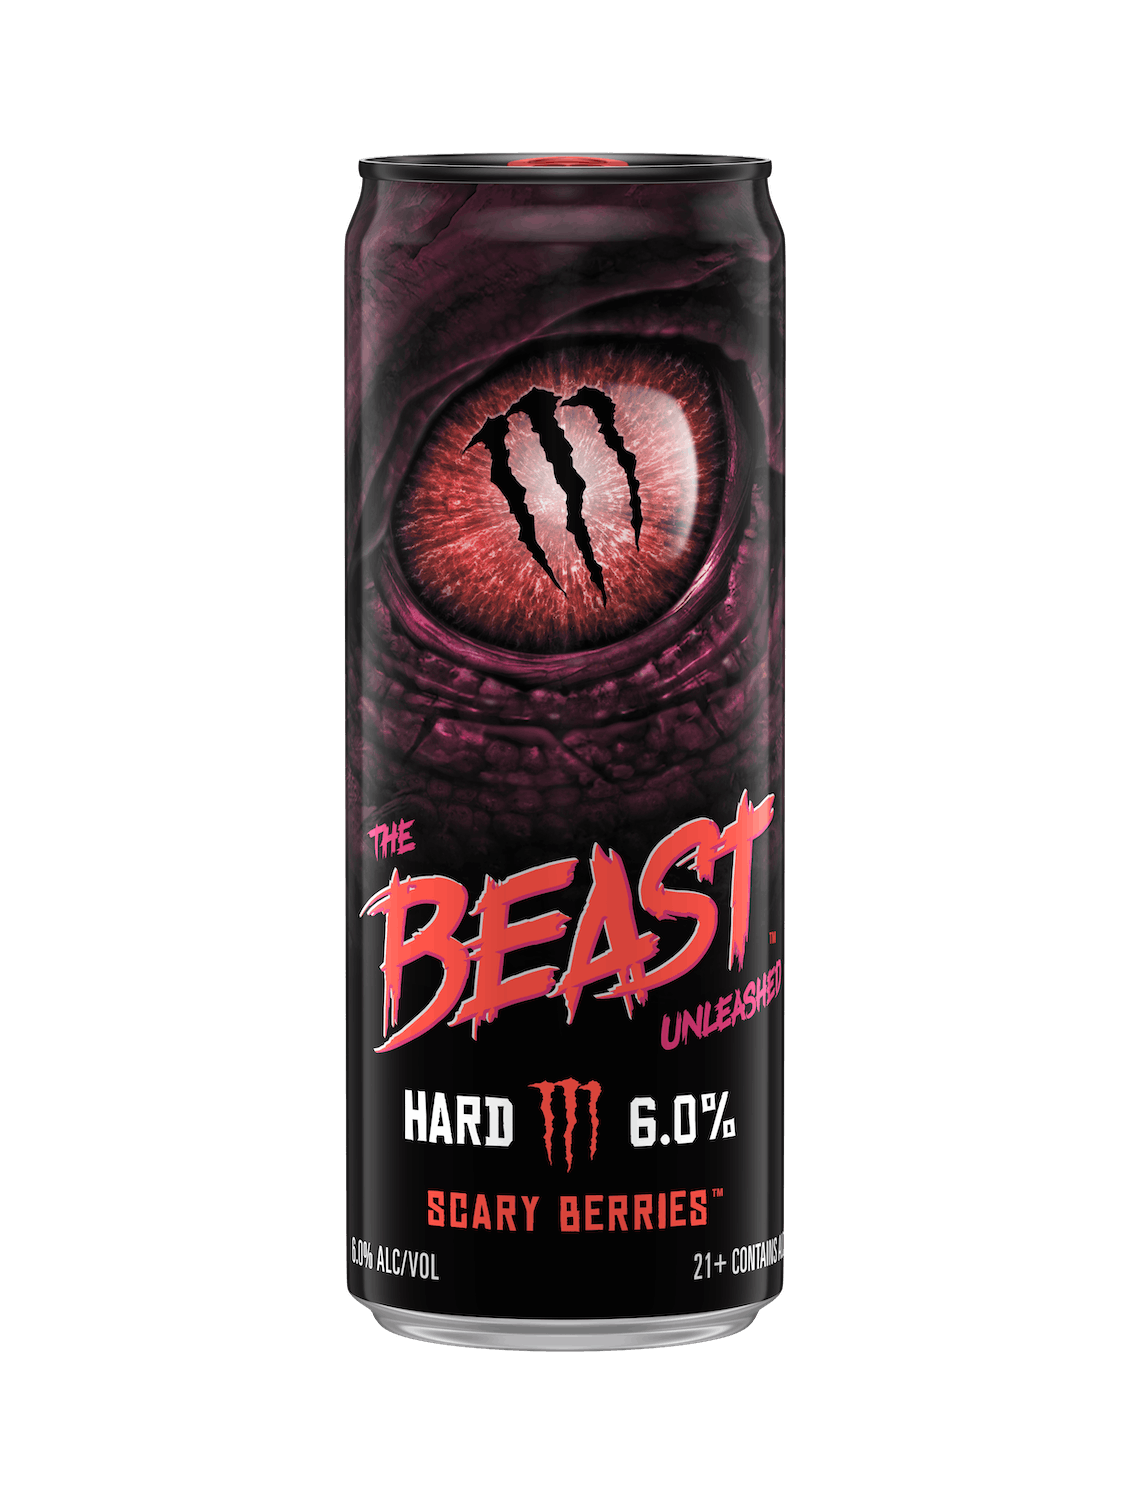 The Beast Unleashed by Monster. Scary Berries